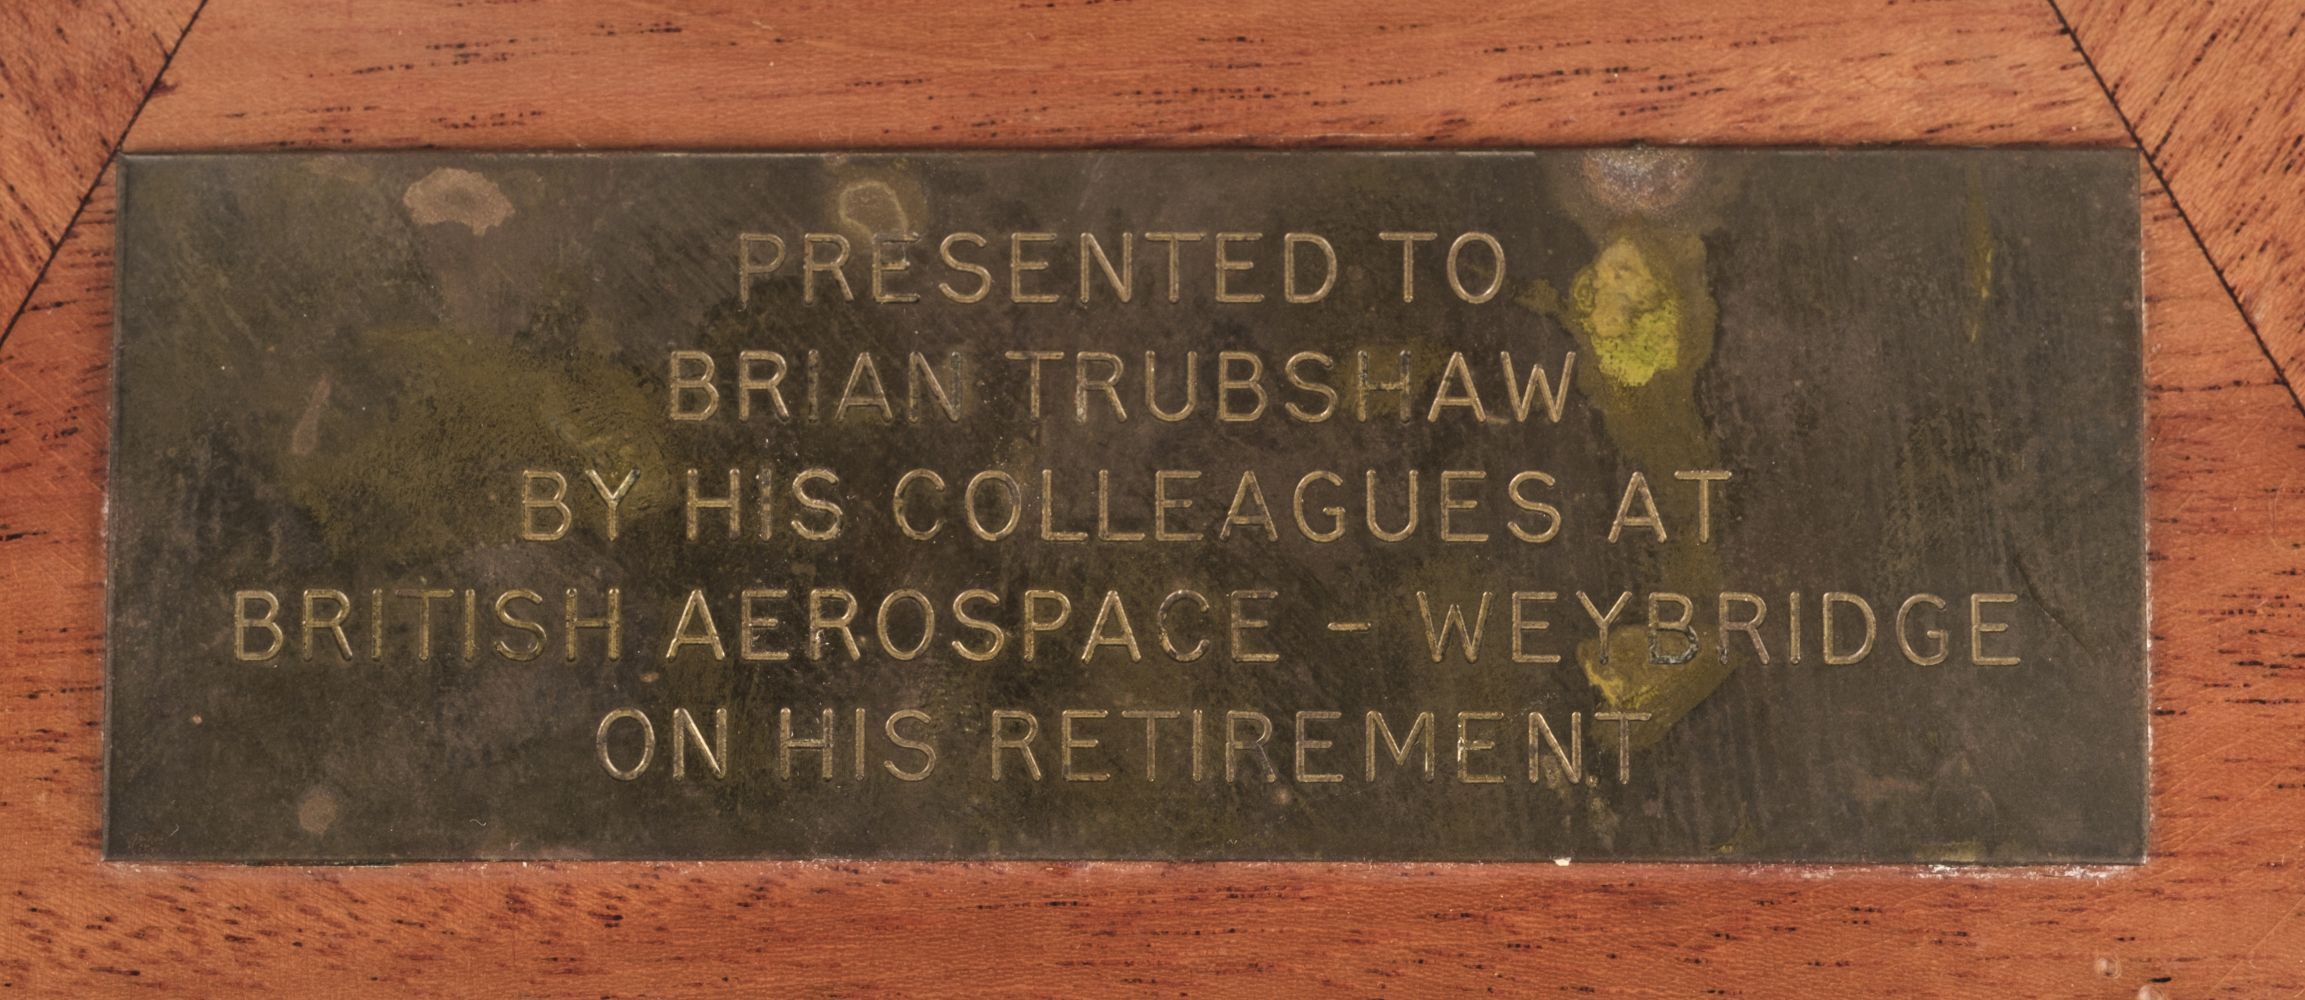 Concorde. Presentation table, Chief Test Pilot Ernest Brian Trubshaw - Image 2 of 2